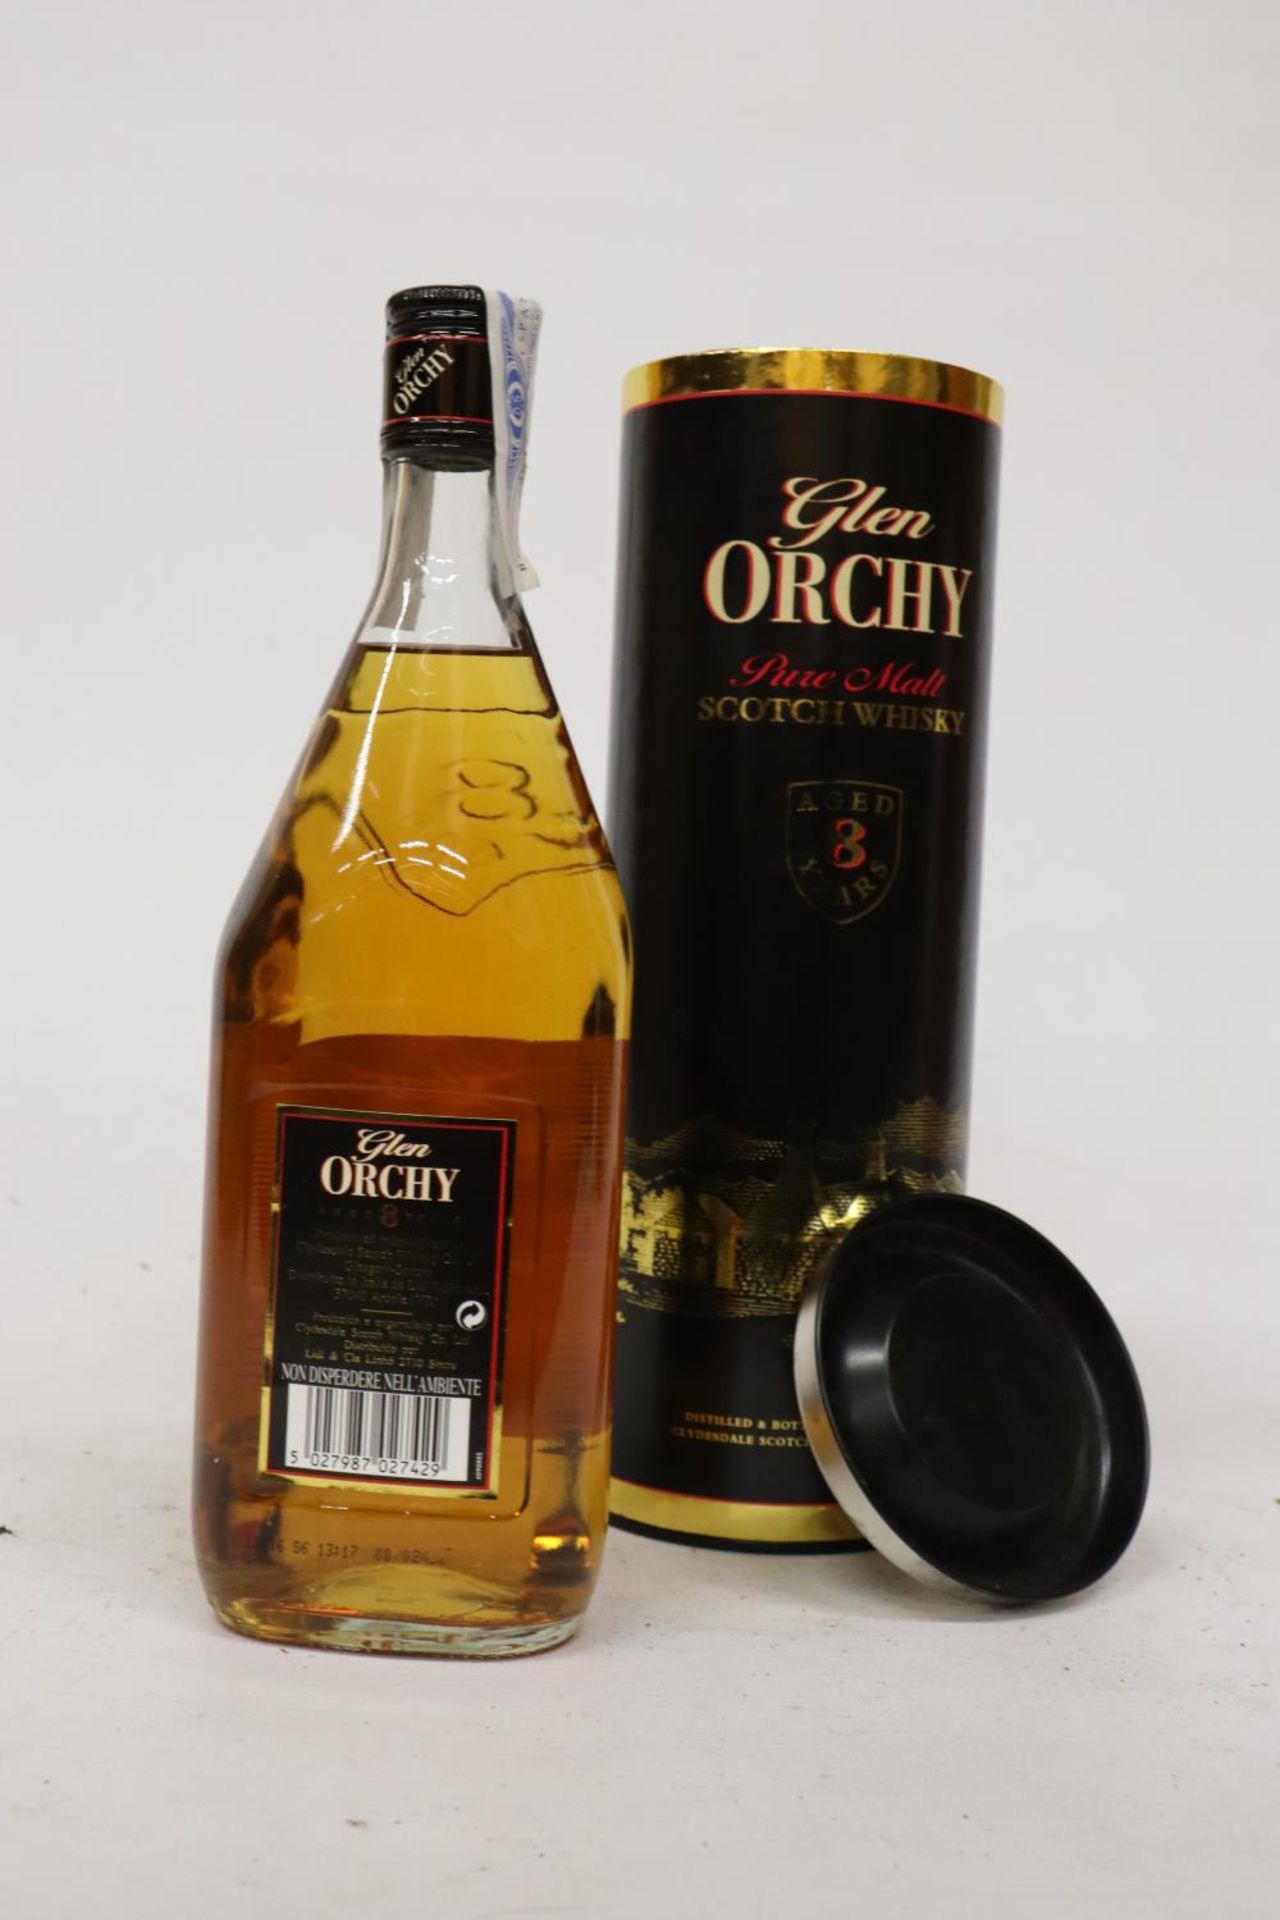 A BOXED BOTTLE OF GLEN ORCHY AGED EIGHT YEAR PURE MALT SCOTCH WHISKY - Image 5 of 5